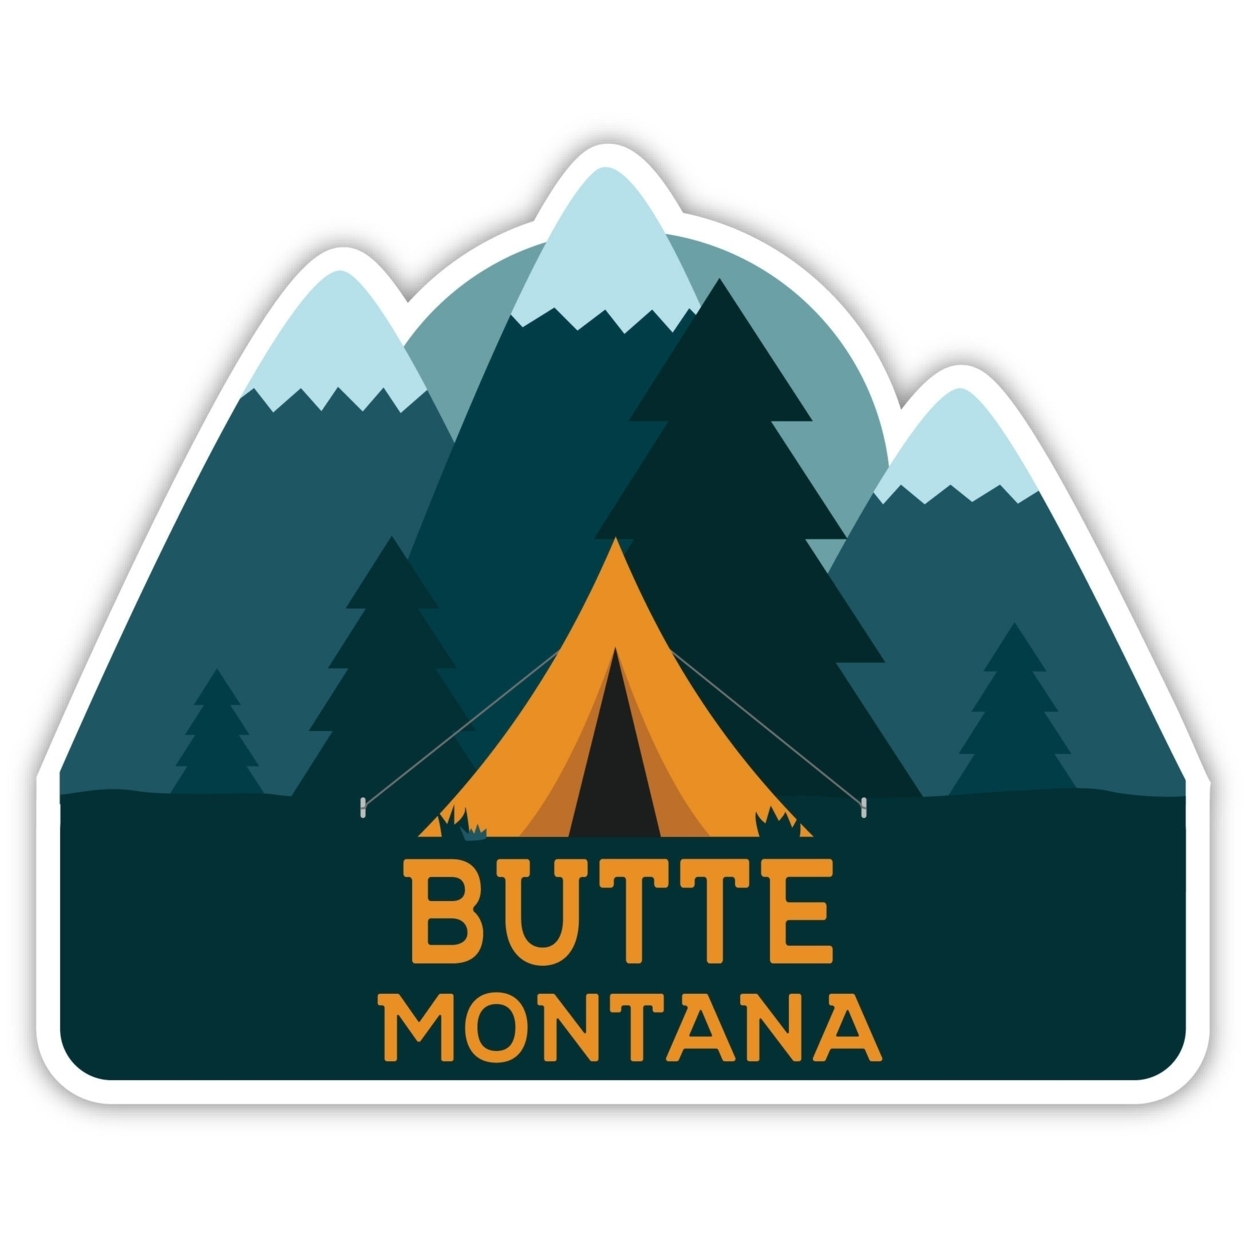 Butte Montana Souvenir Decorative Stickers (Choose Theme And Size) - 4-Pack, 8-Inch, Tent